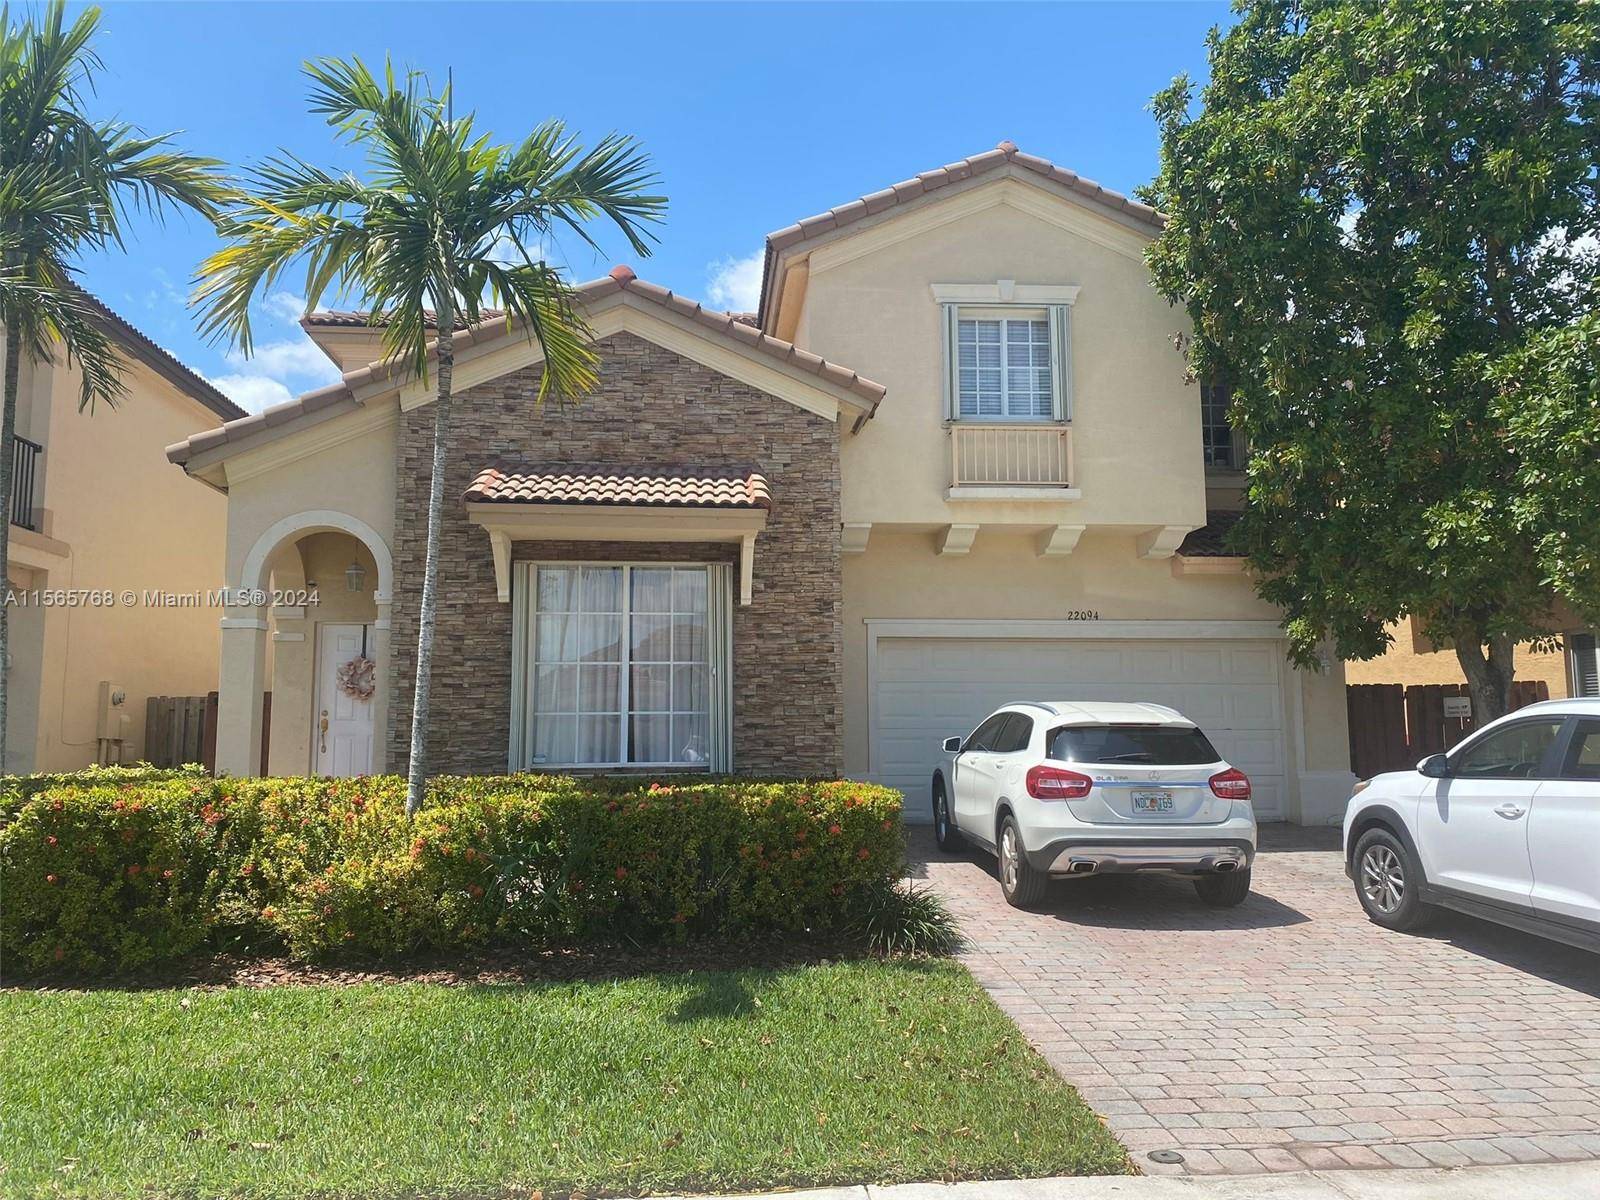 This spacious updated 4 bedroom, 2 1 2 bathroom pool home in the heart of the exclusive Isles at Bayshore community is waiting for you.